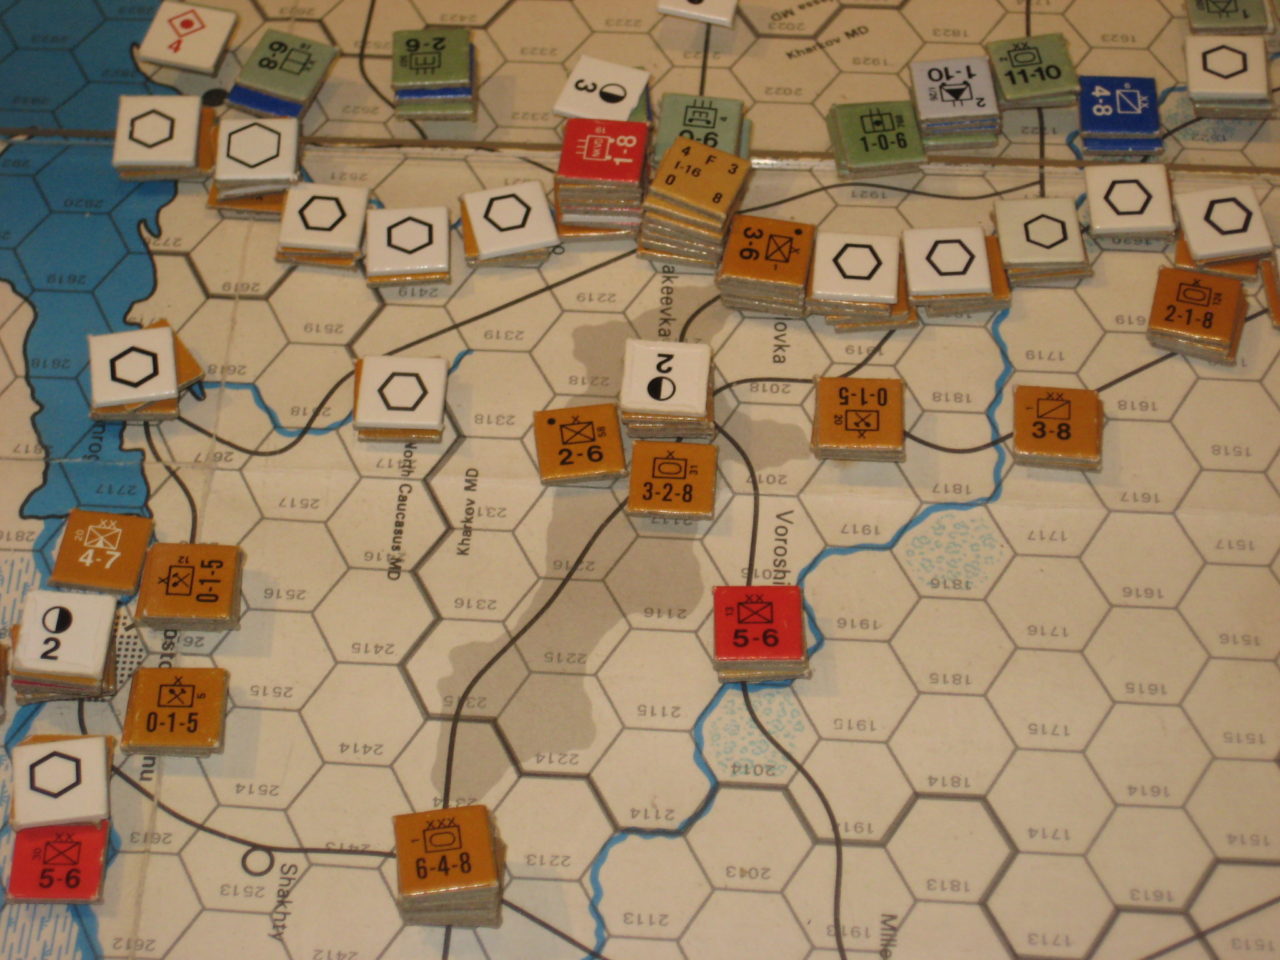 May I 42: Sourthern Front reinforces its defensive lines